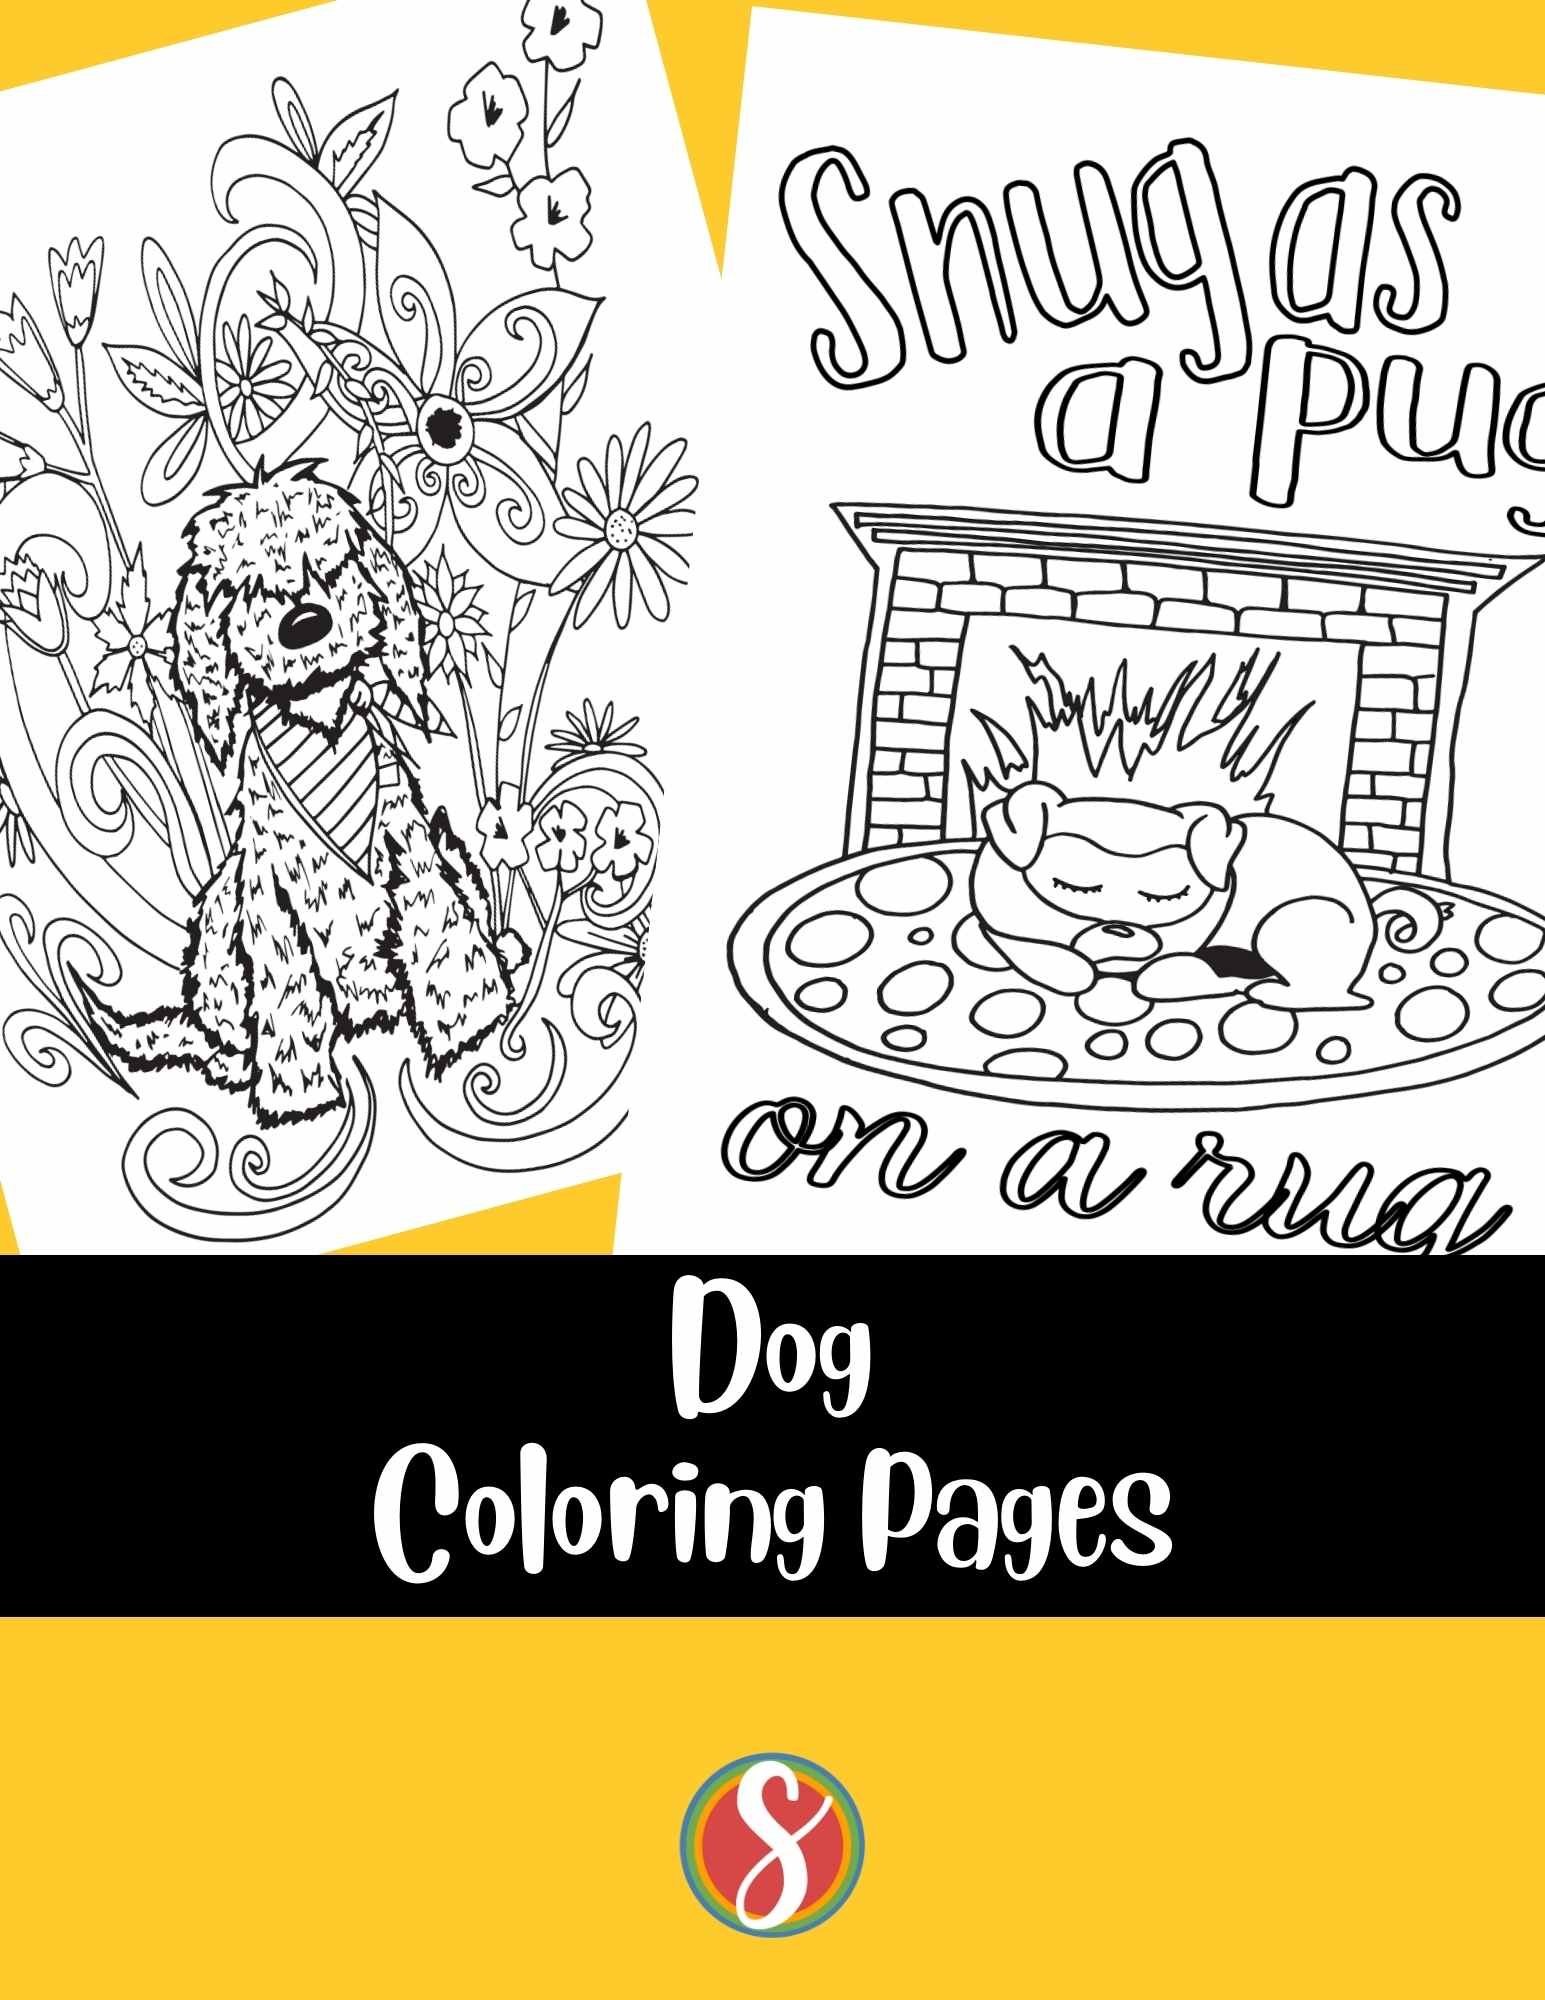 2 dog coloring pages on a yellow background